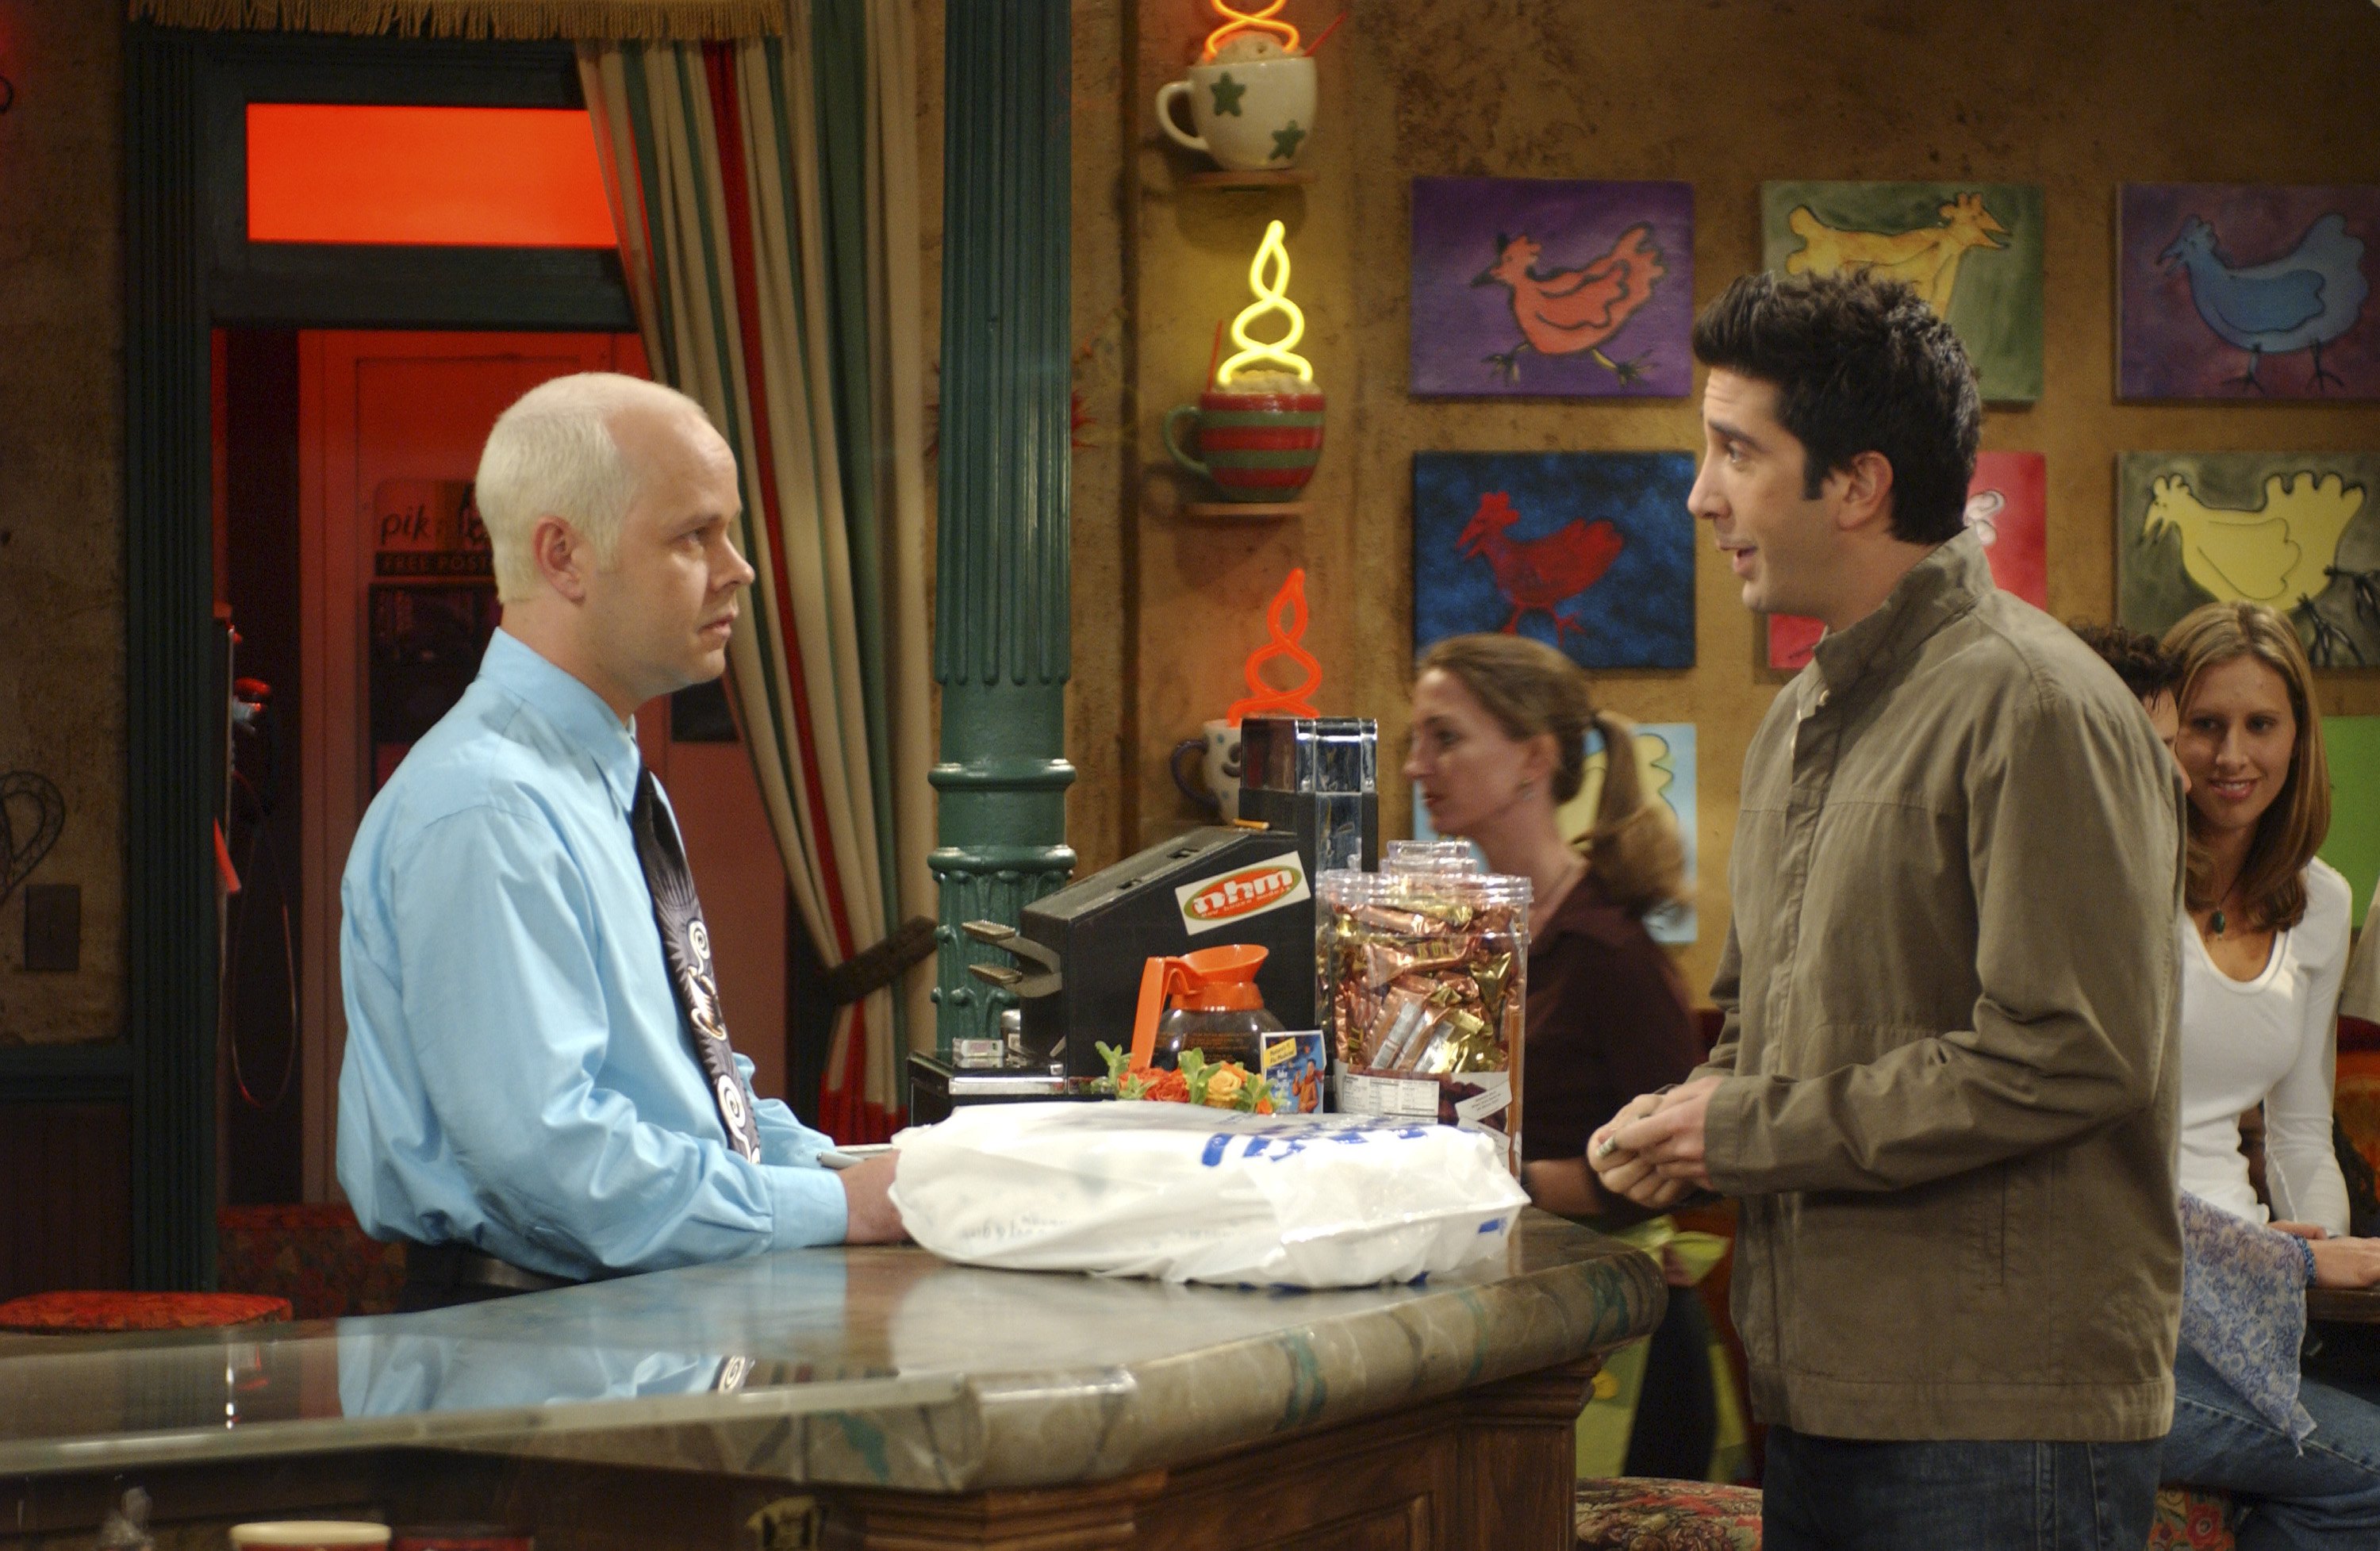 James Michael Tyler as Gunther and David Schwimmer as Ross Geller in Central Perk during the filming of 'Friends'